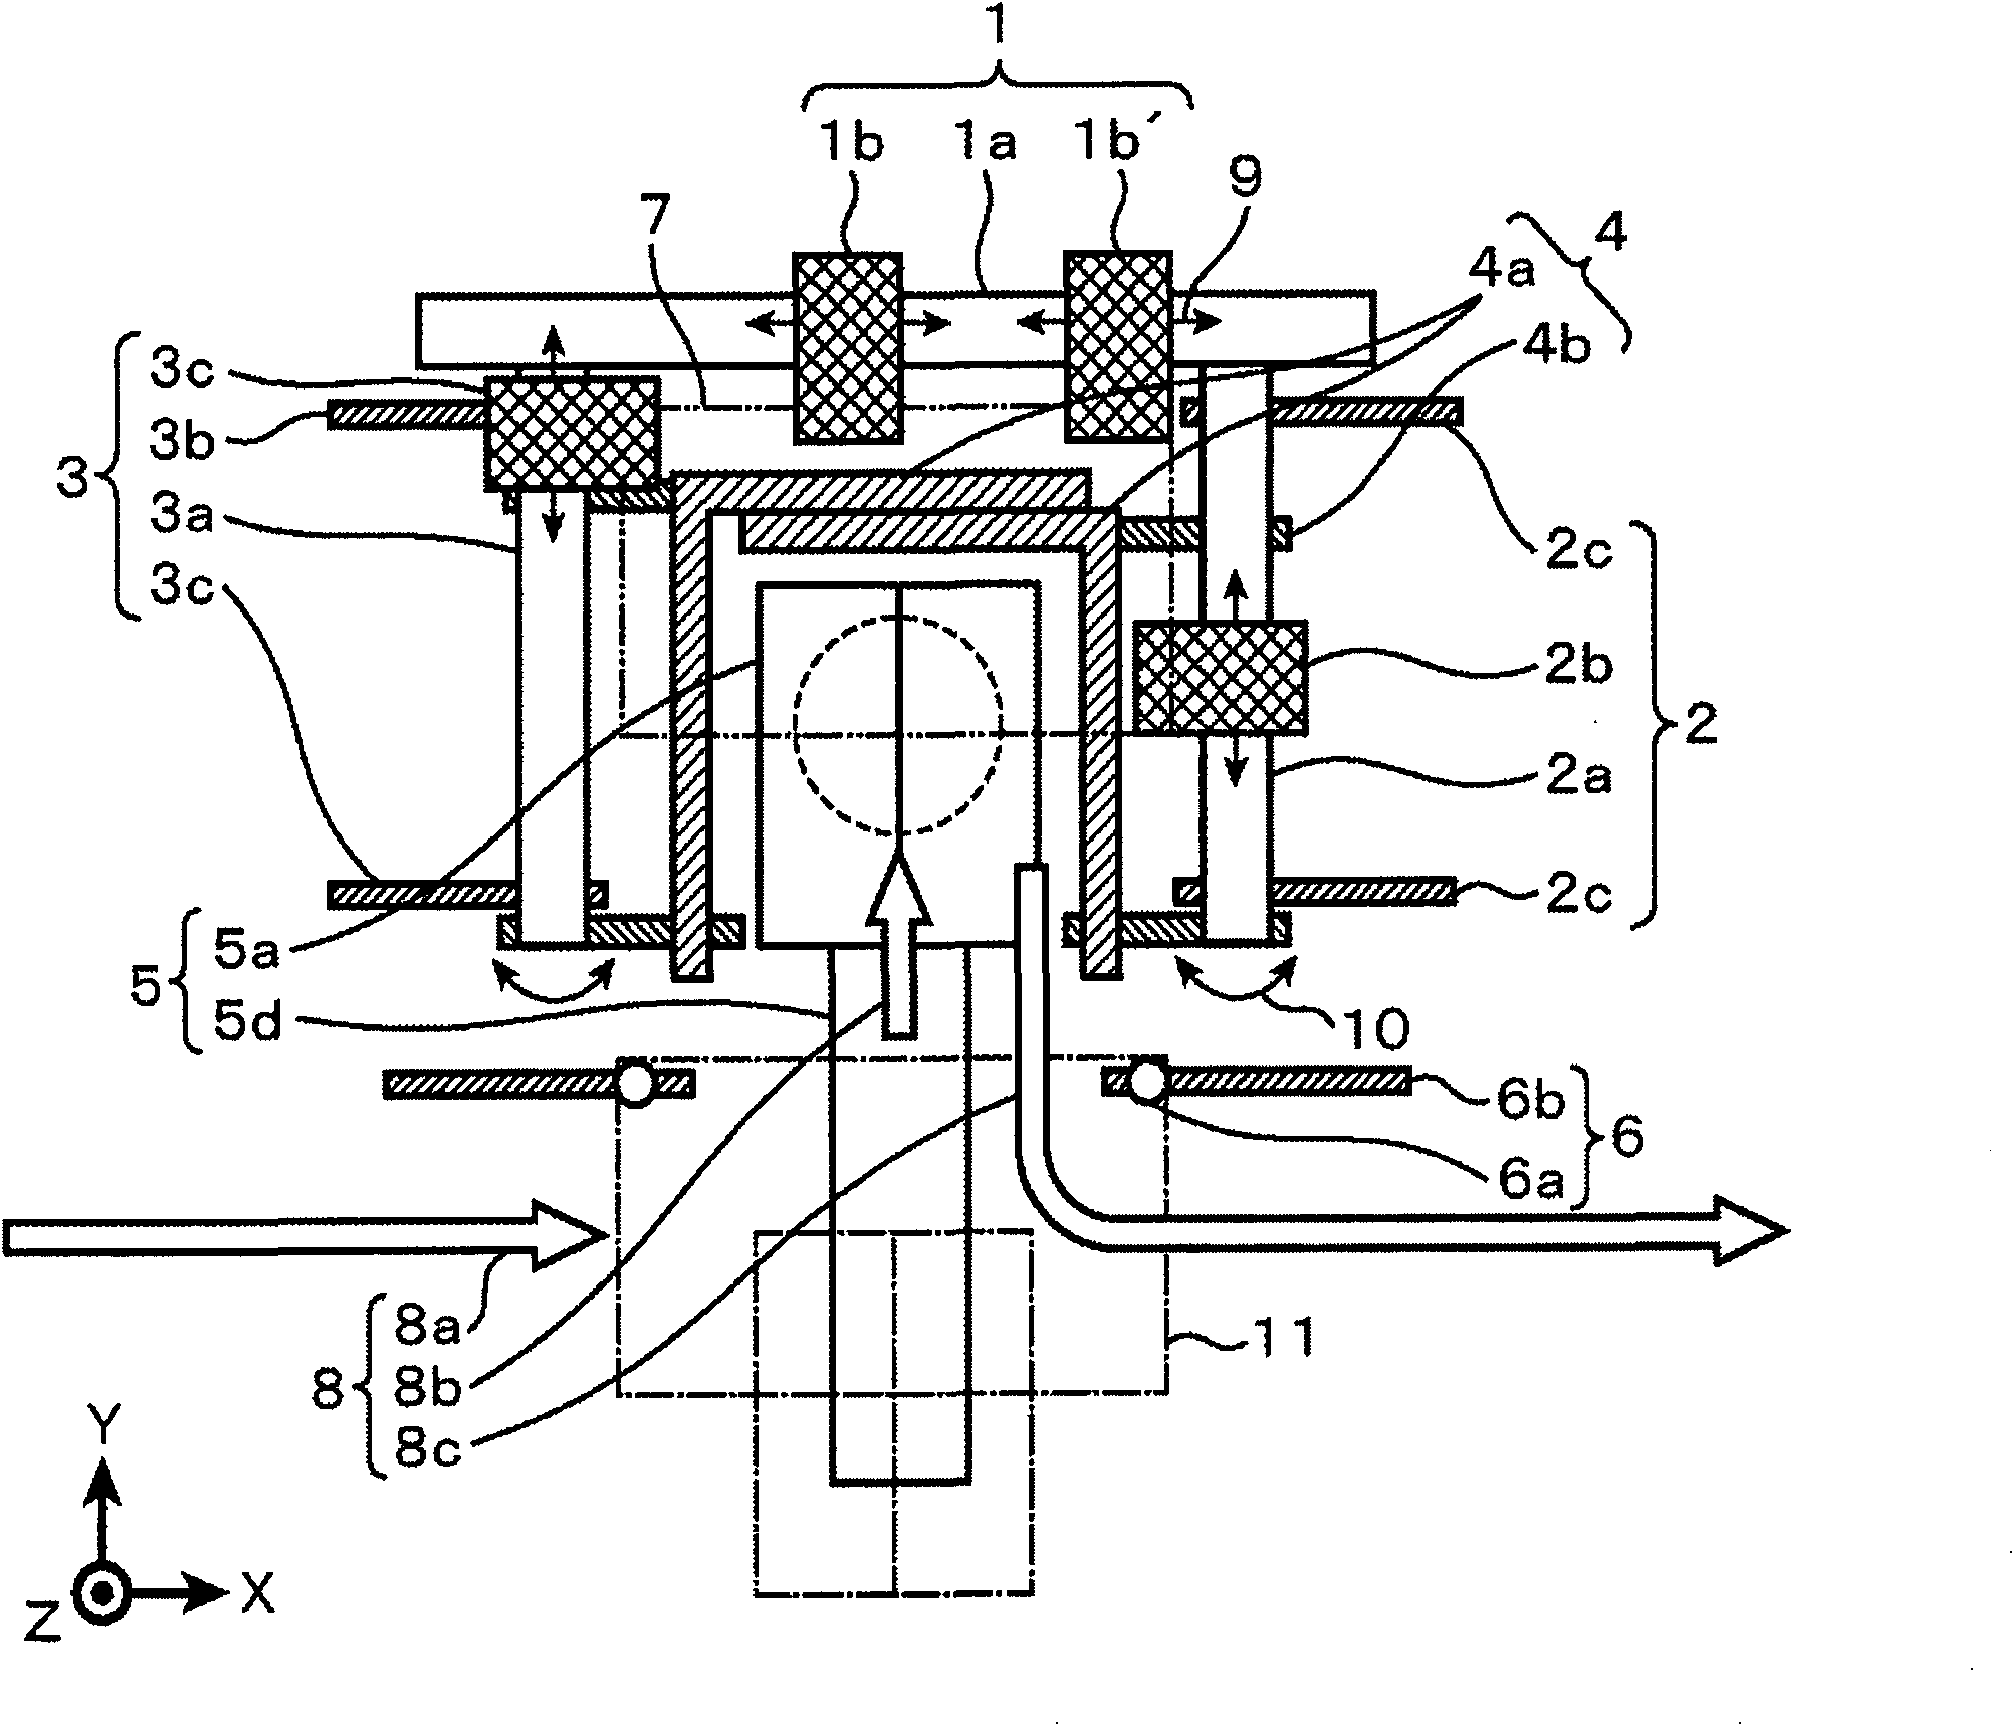 Display panel module assembly device